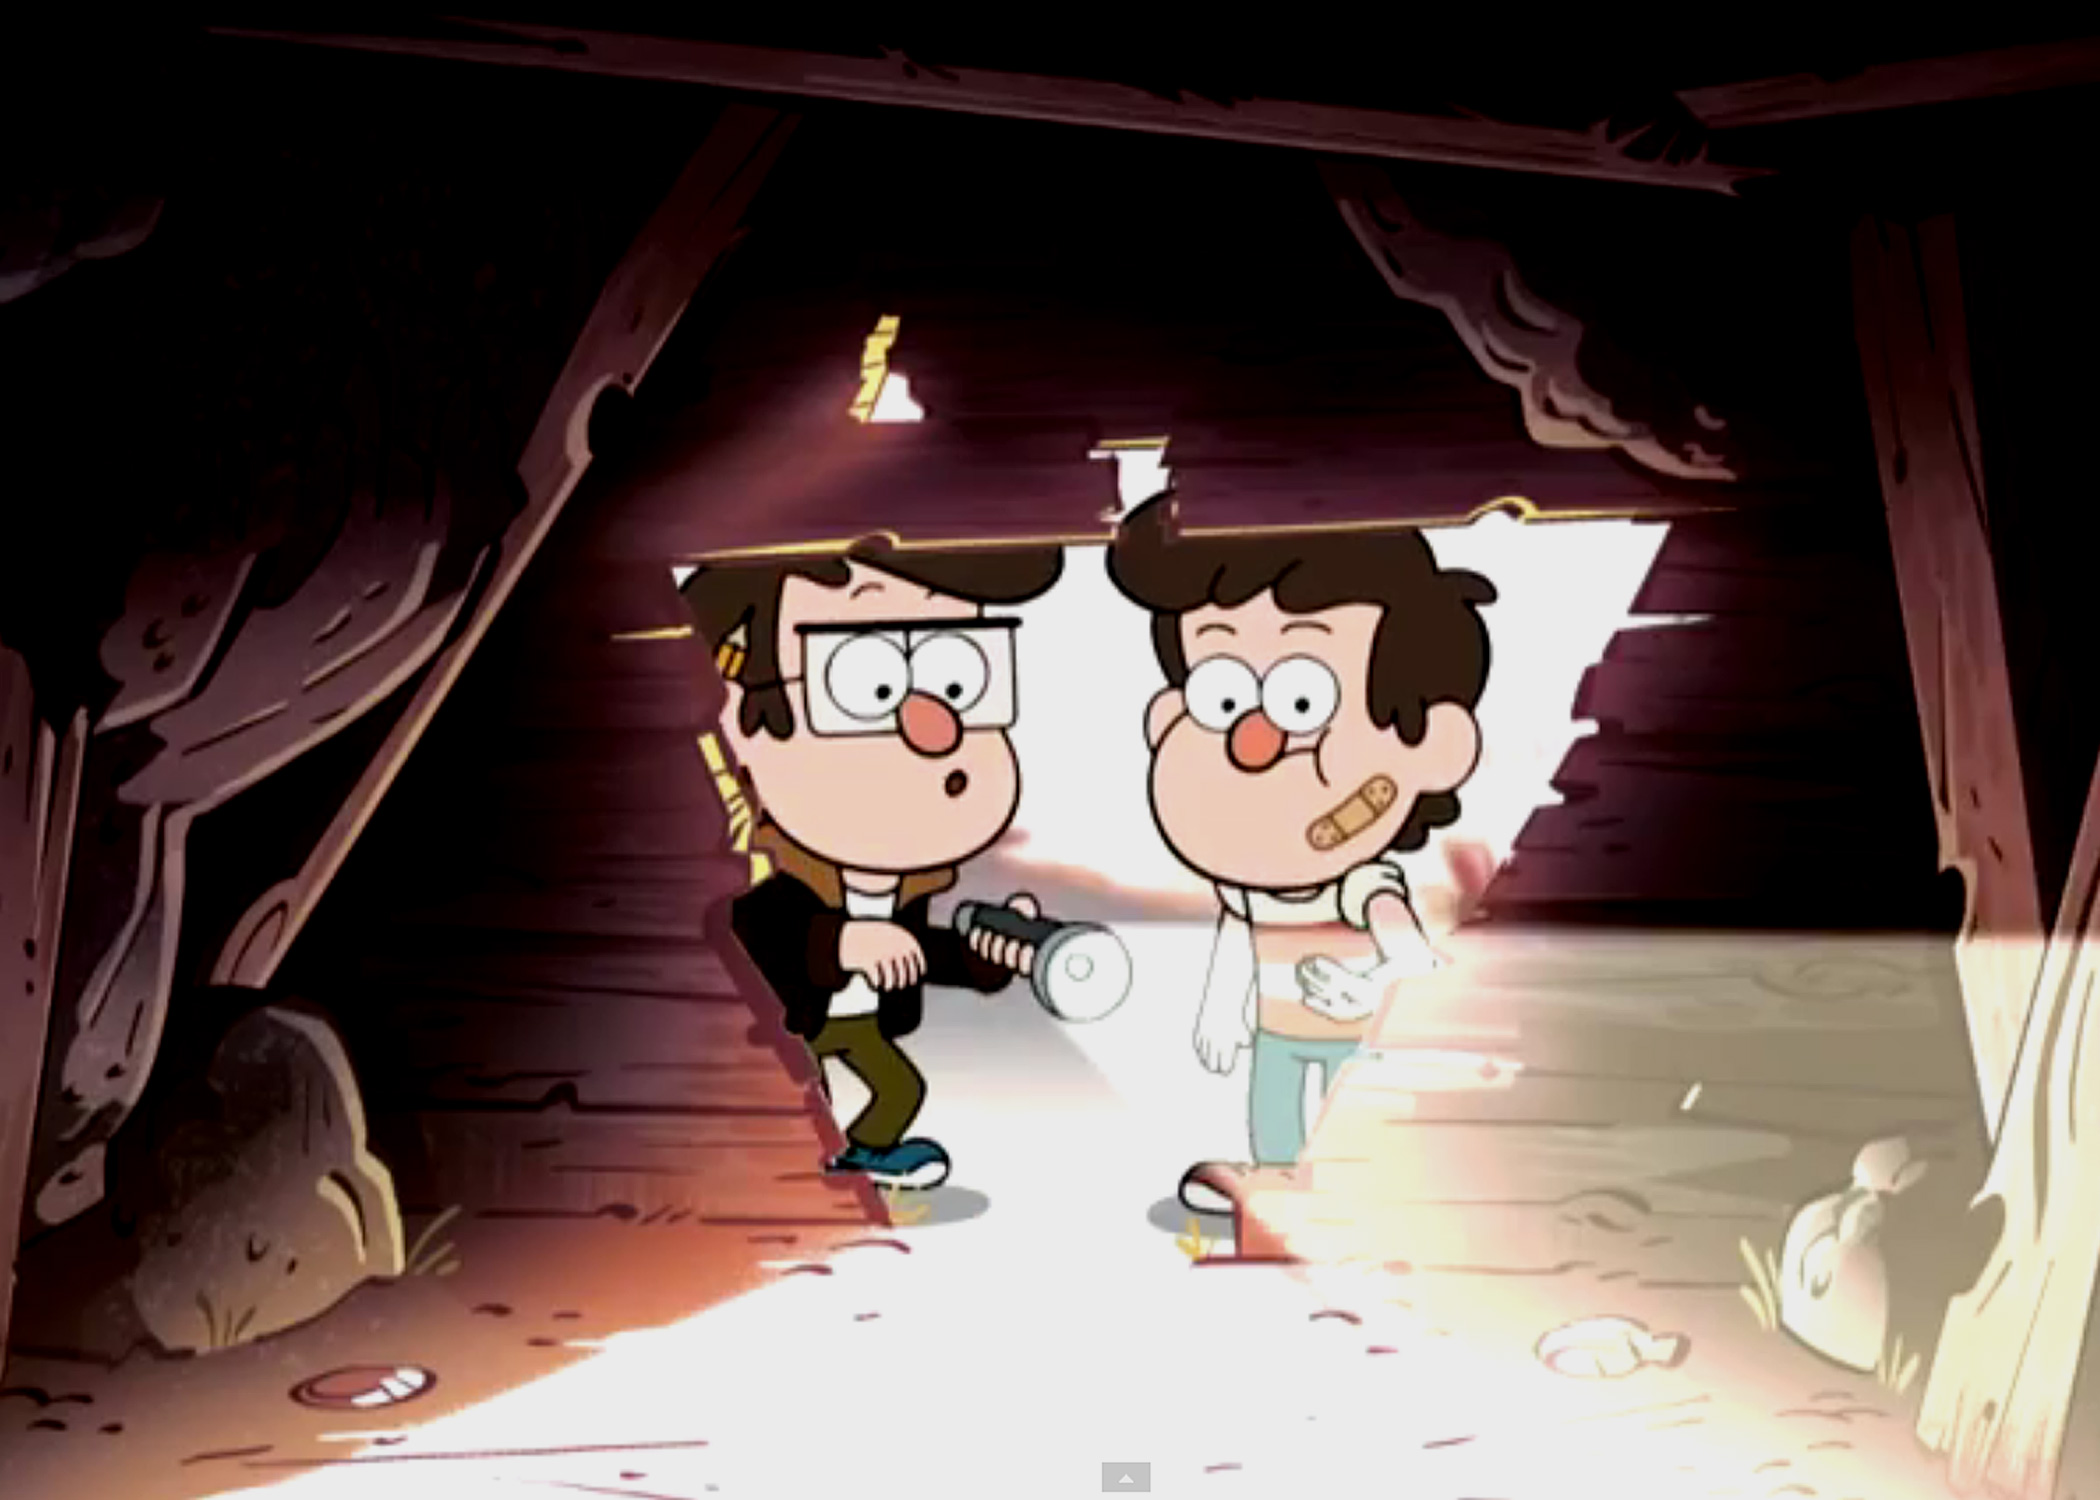 Check Out the New 'Gravity Falls' Trailer Debuting at ComicCon (VIDEO)